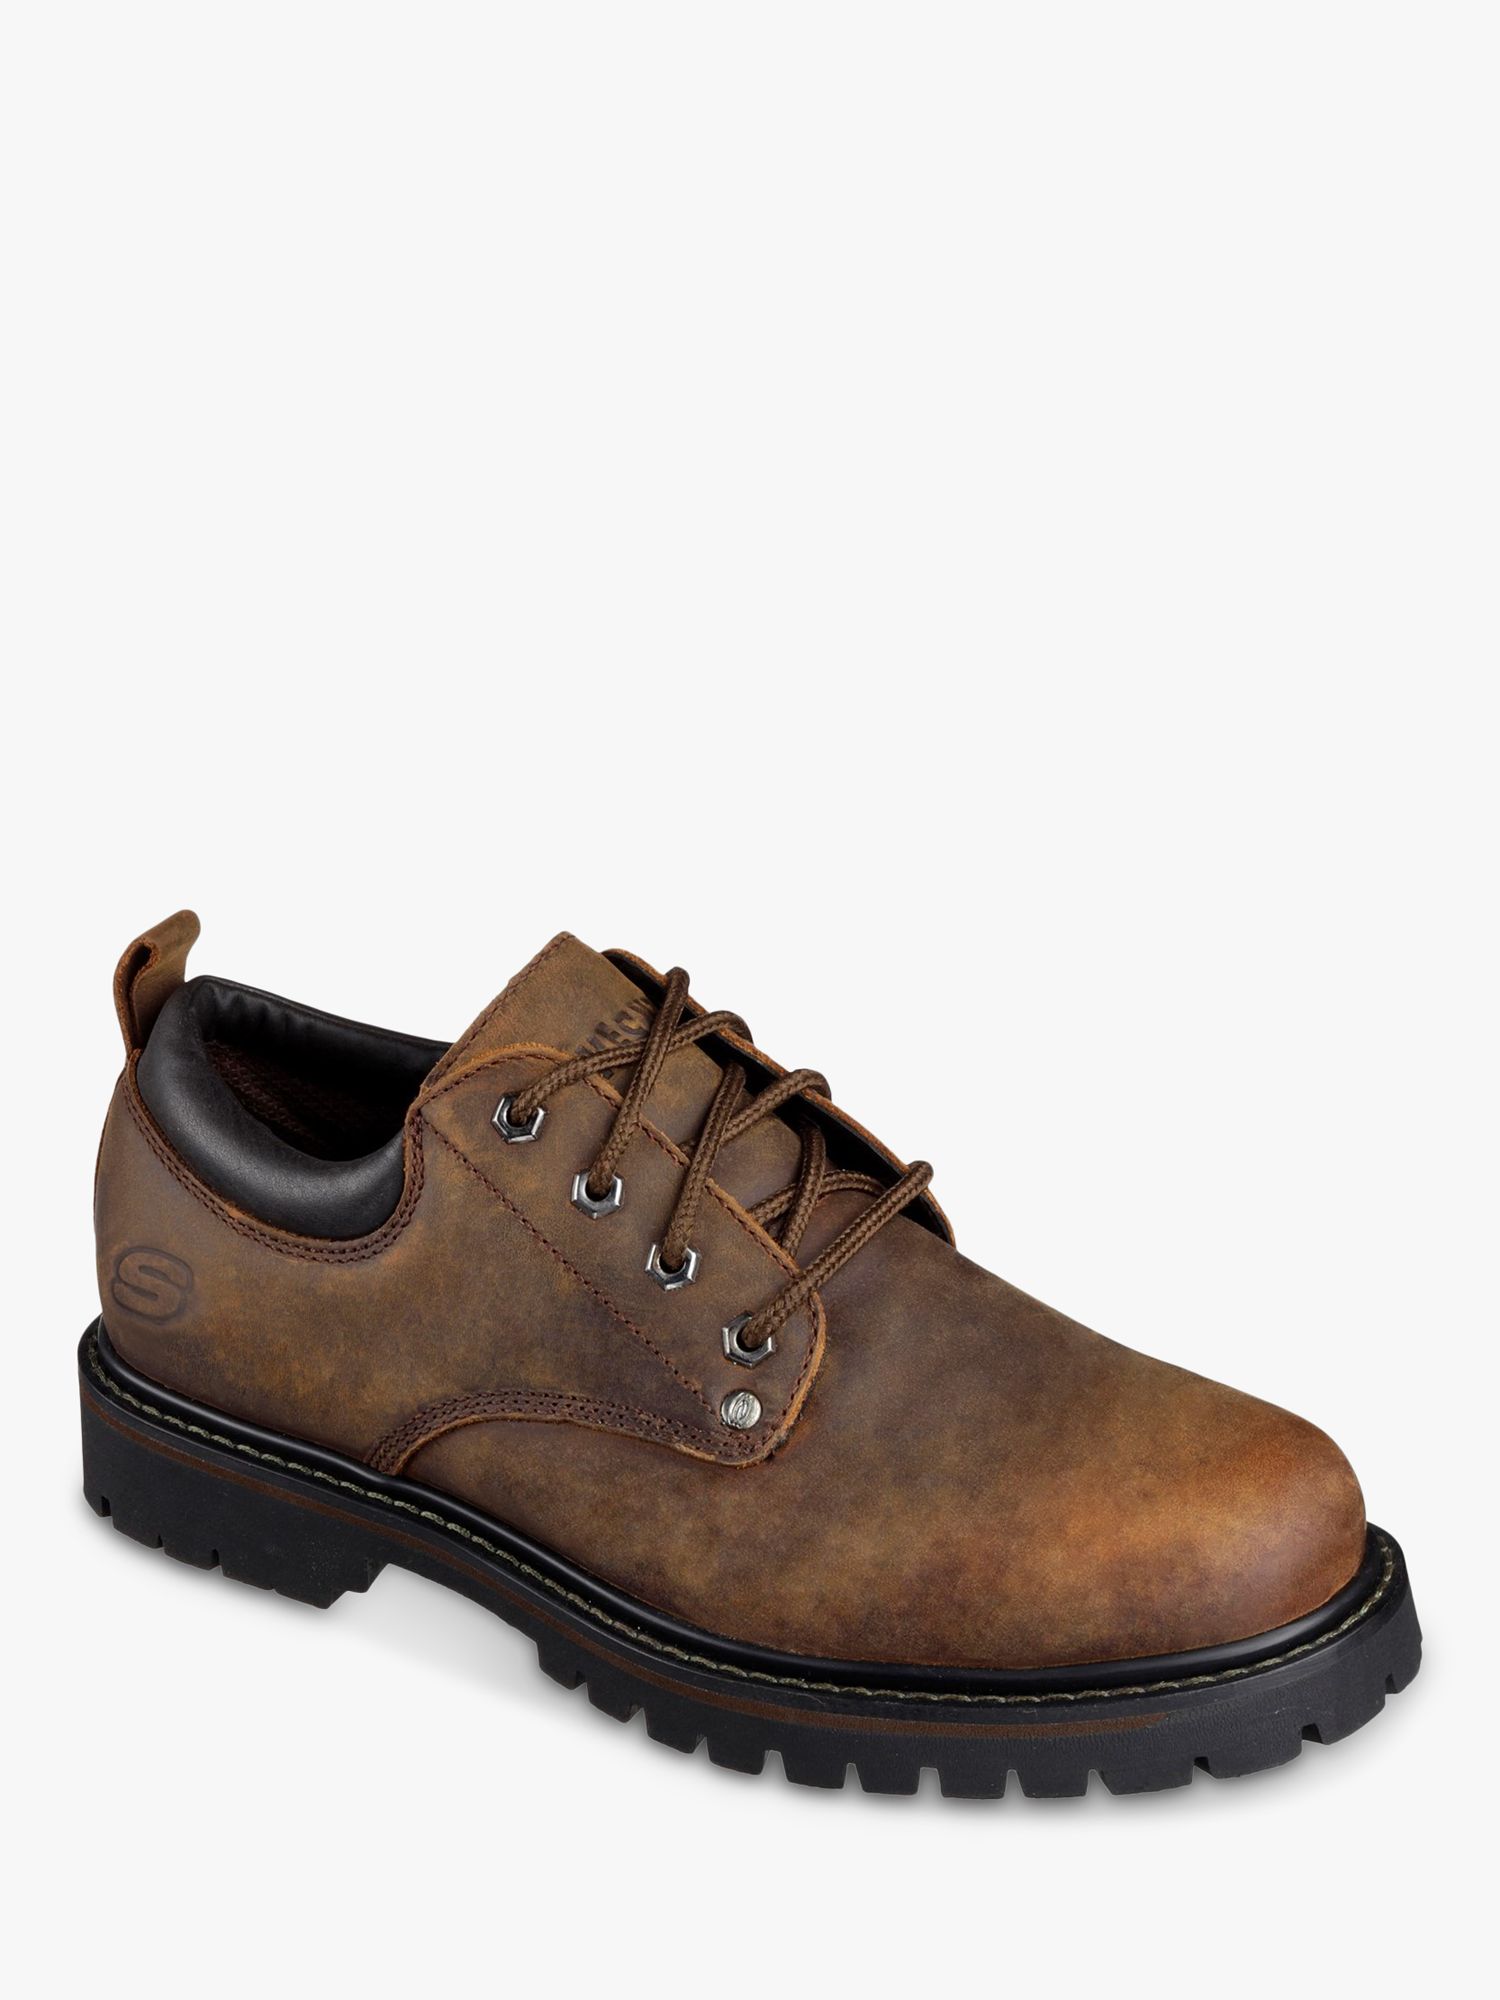 Skechers Leather Tom Cats Lace Up Oxford Shoes, Dark Brown at John ...